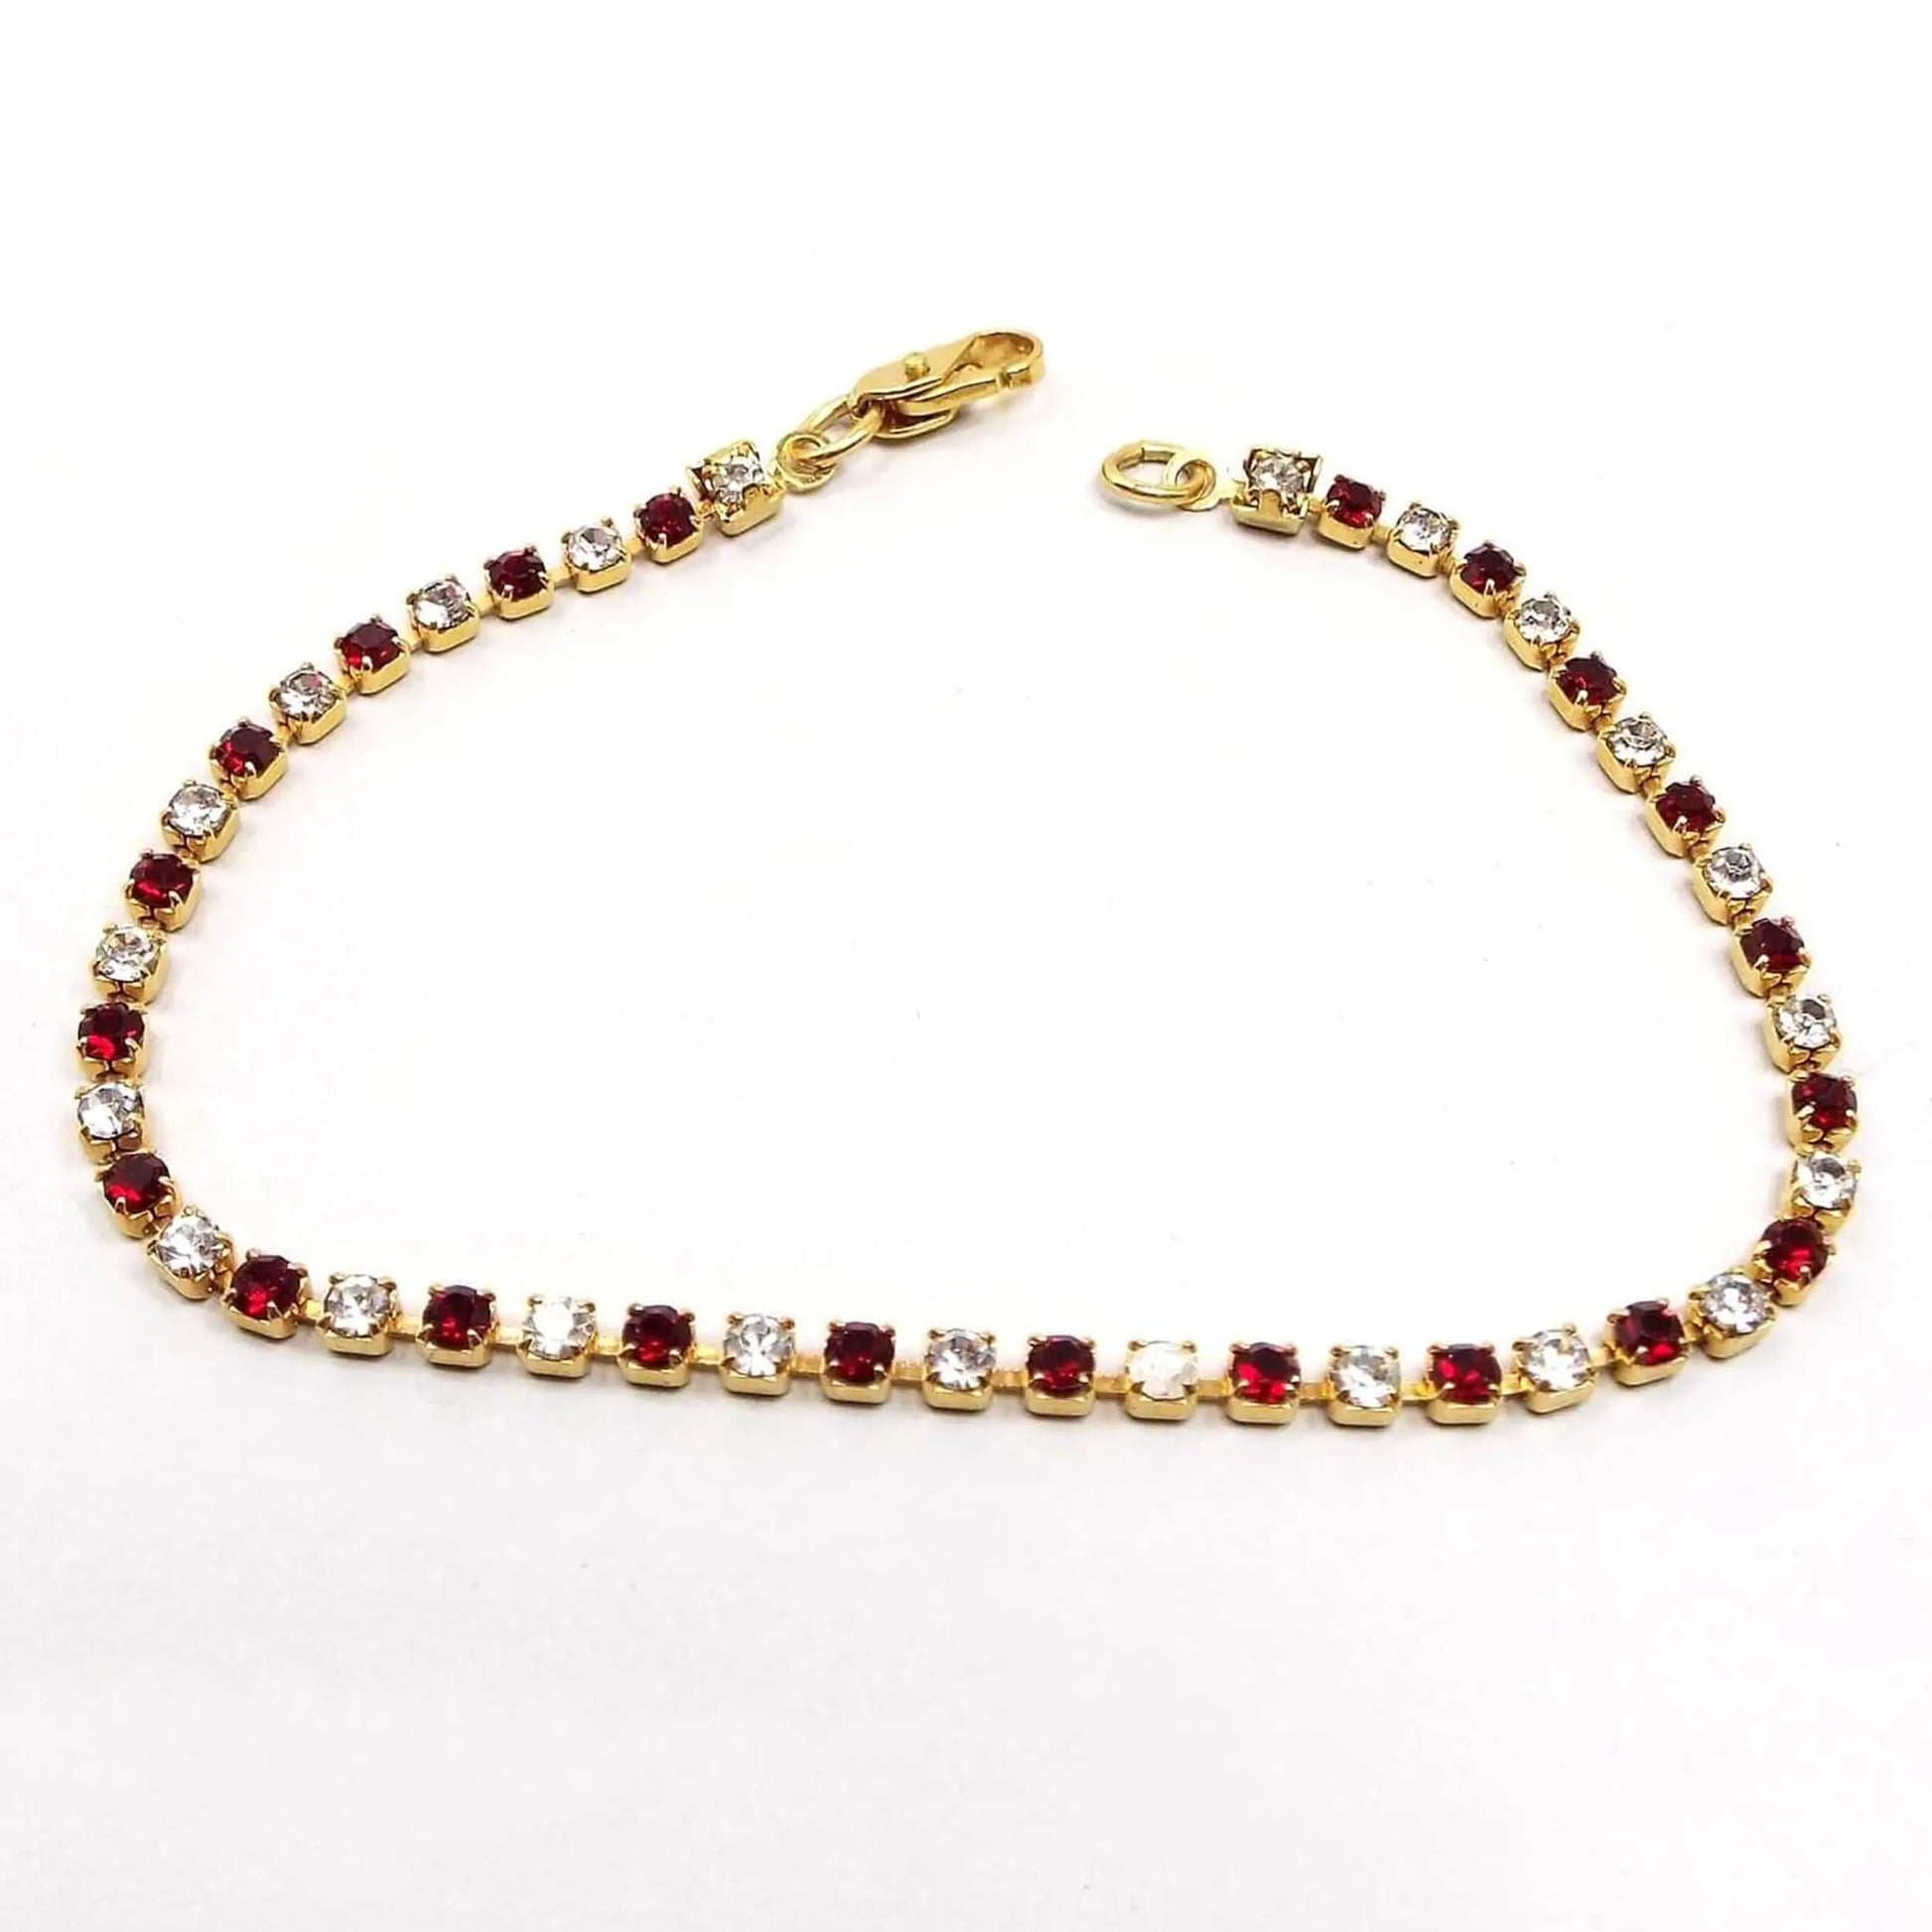 Top view of the retro vintage rhinestone bracelet. The metal is gold tone in color. There are small round rhinestones alternating in color between red and clear. There is a lobster claw clasp at the end.